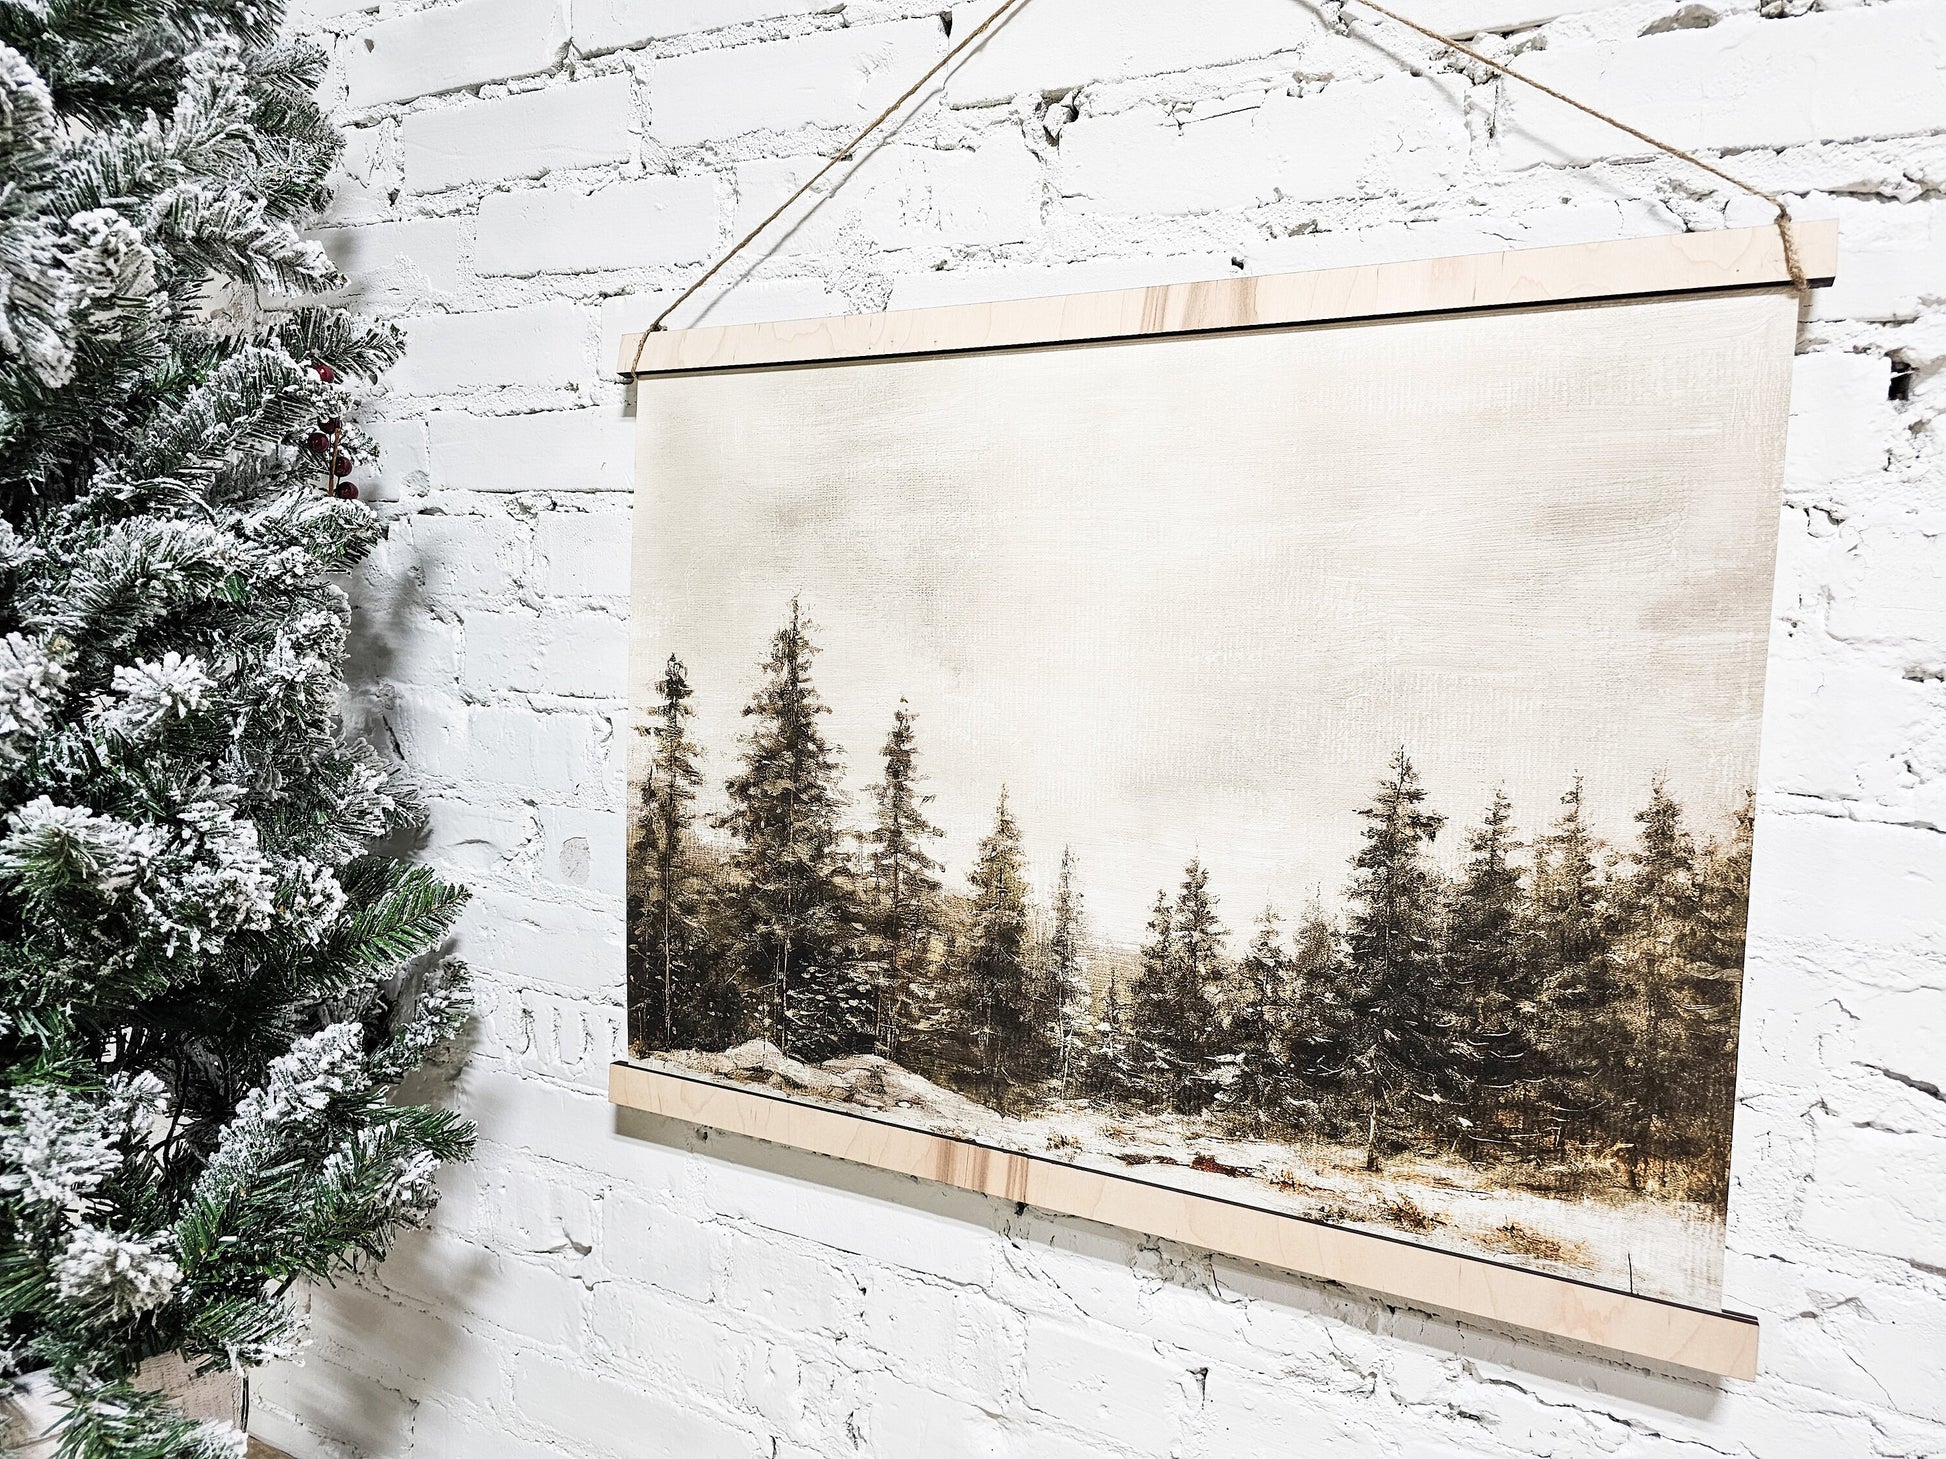 Winter Landscape Wall Art, Snowy Pine Trees Hanging Framed Canvas Deco –  Kobasic Creations